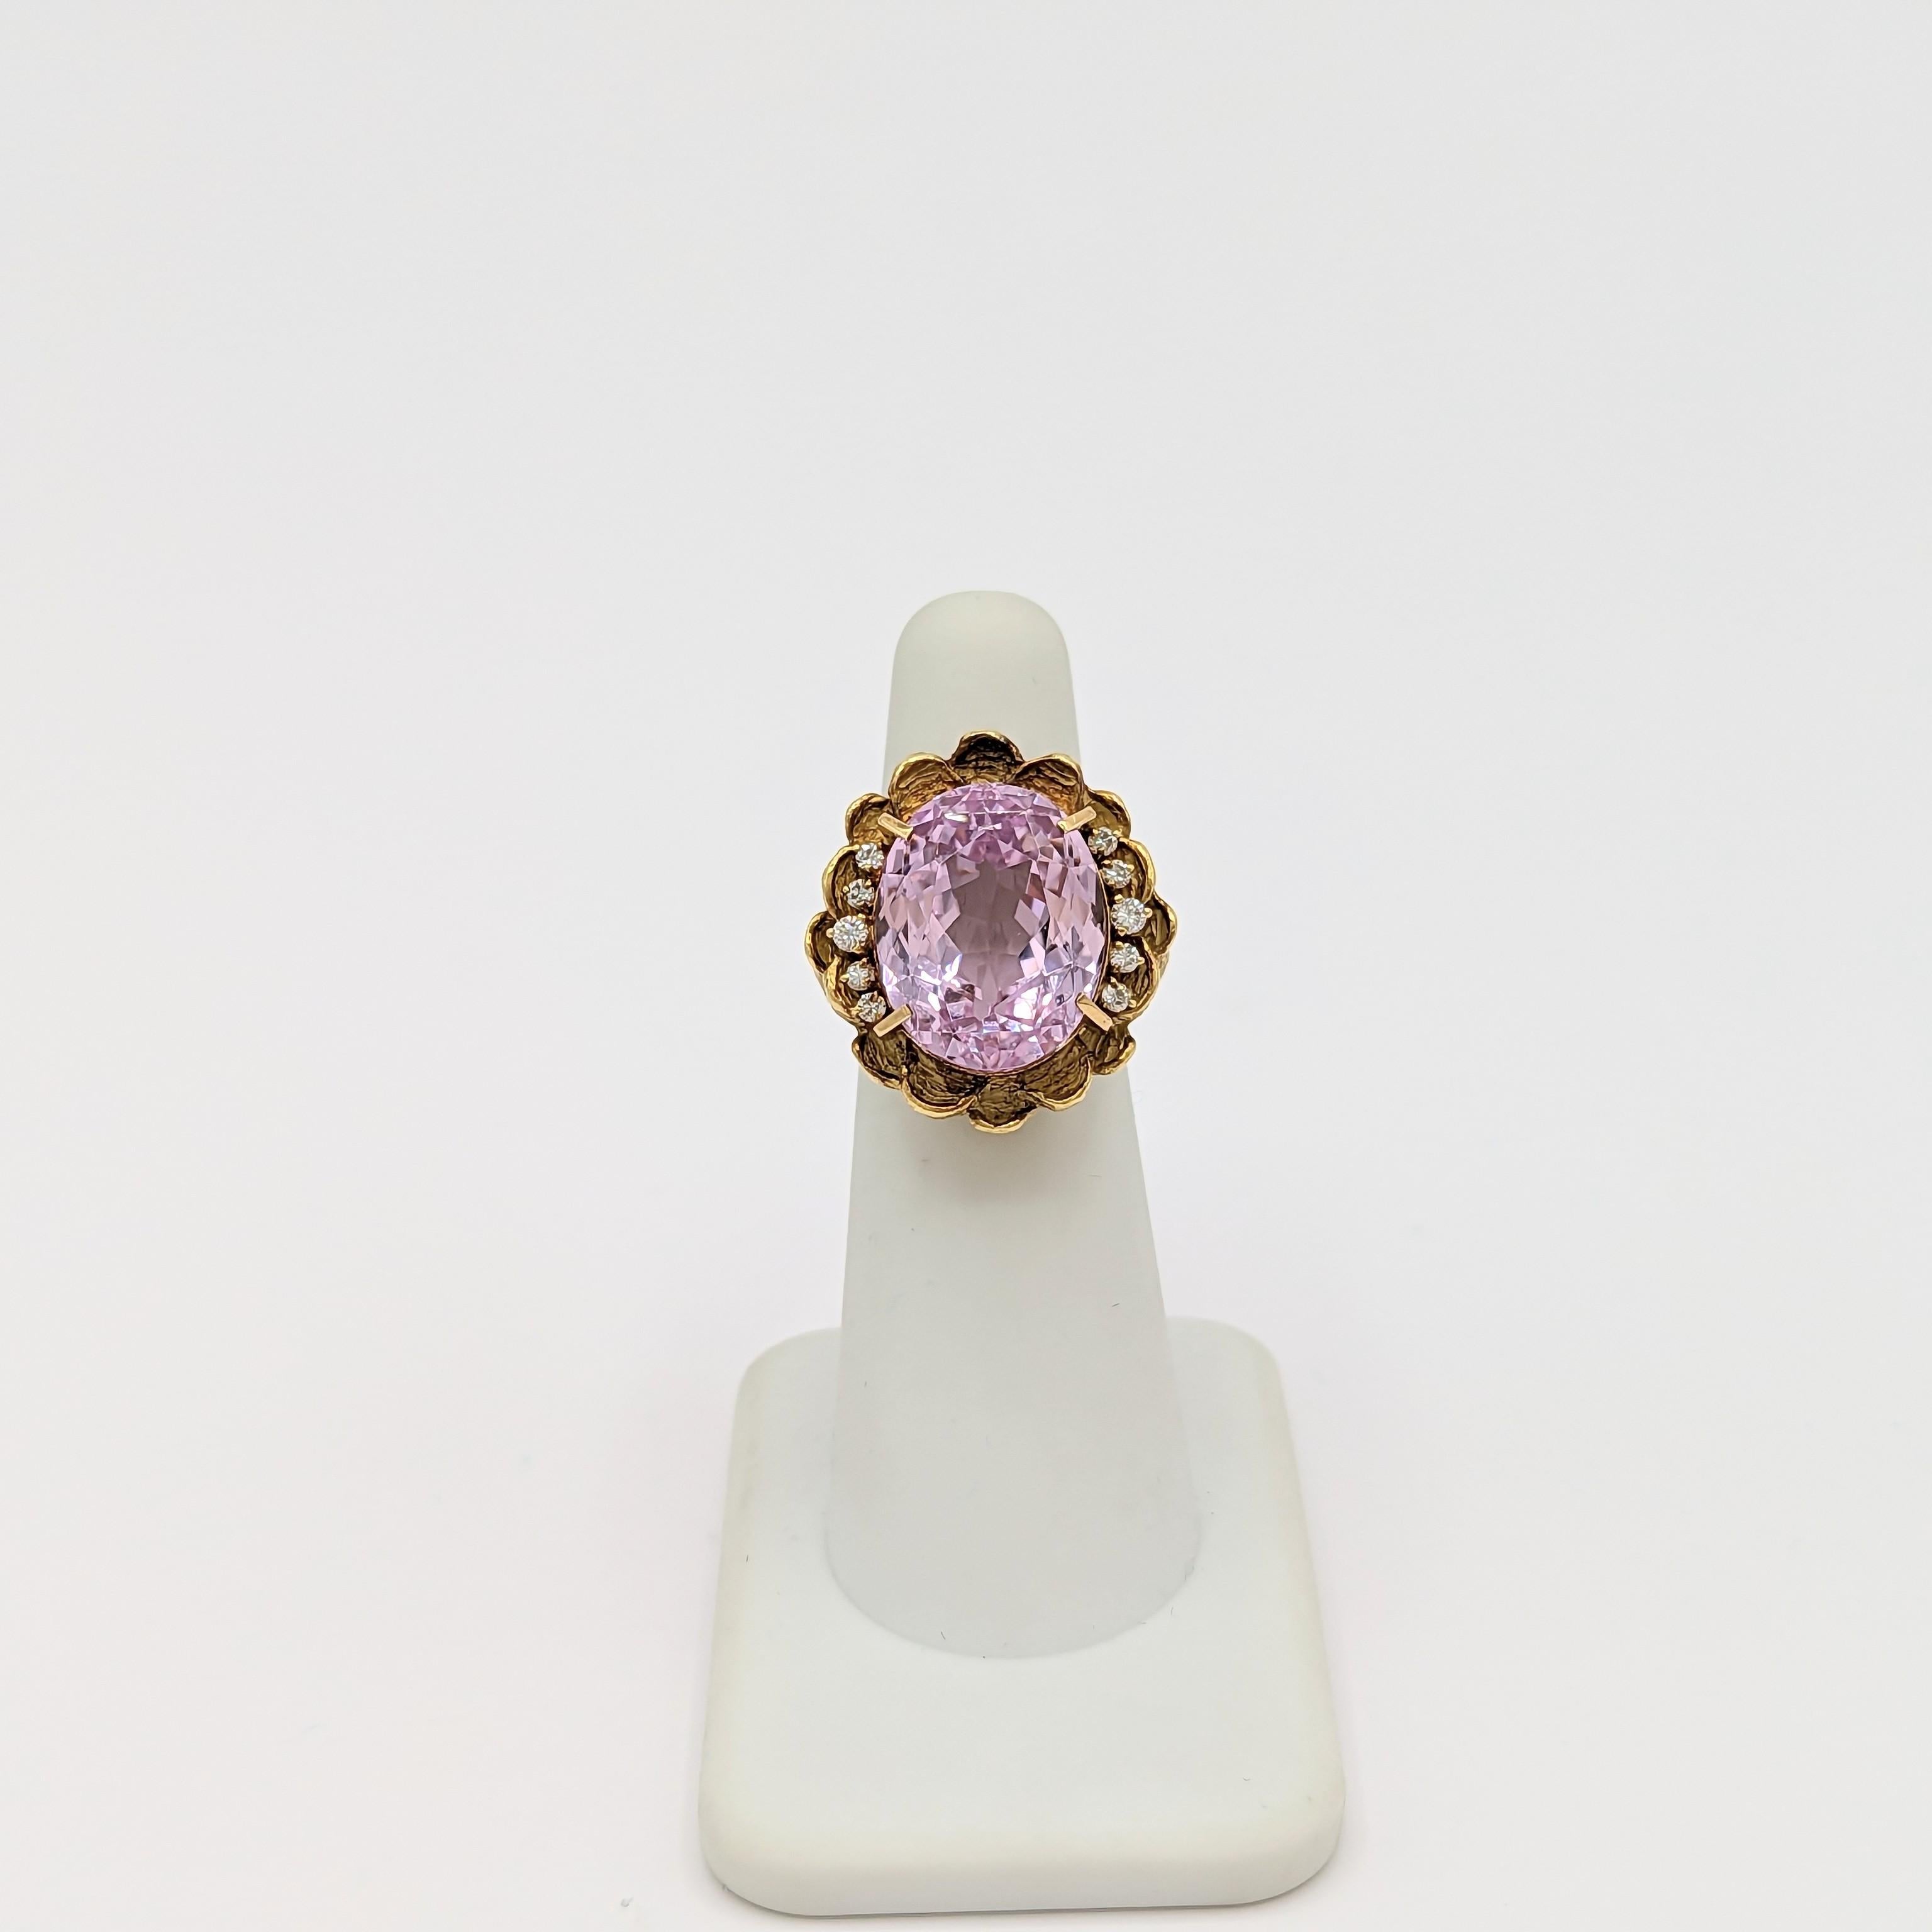 Gorgeous large light pink kunzite oval with 0.05 ct. white diamond rounds and squares.  Handmade in 18k yellow gold.  Ring size 5.5.